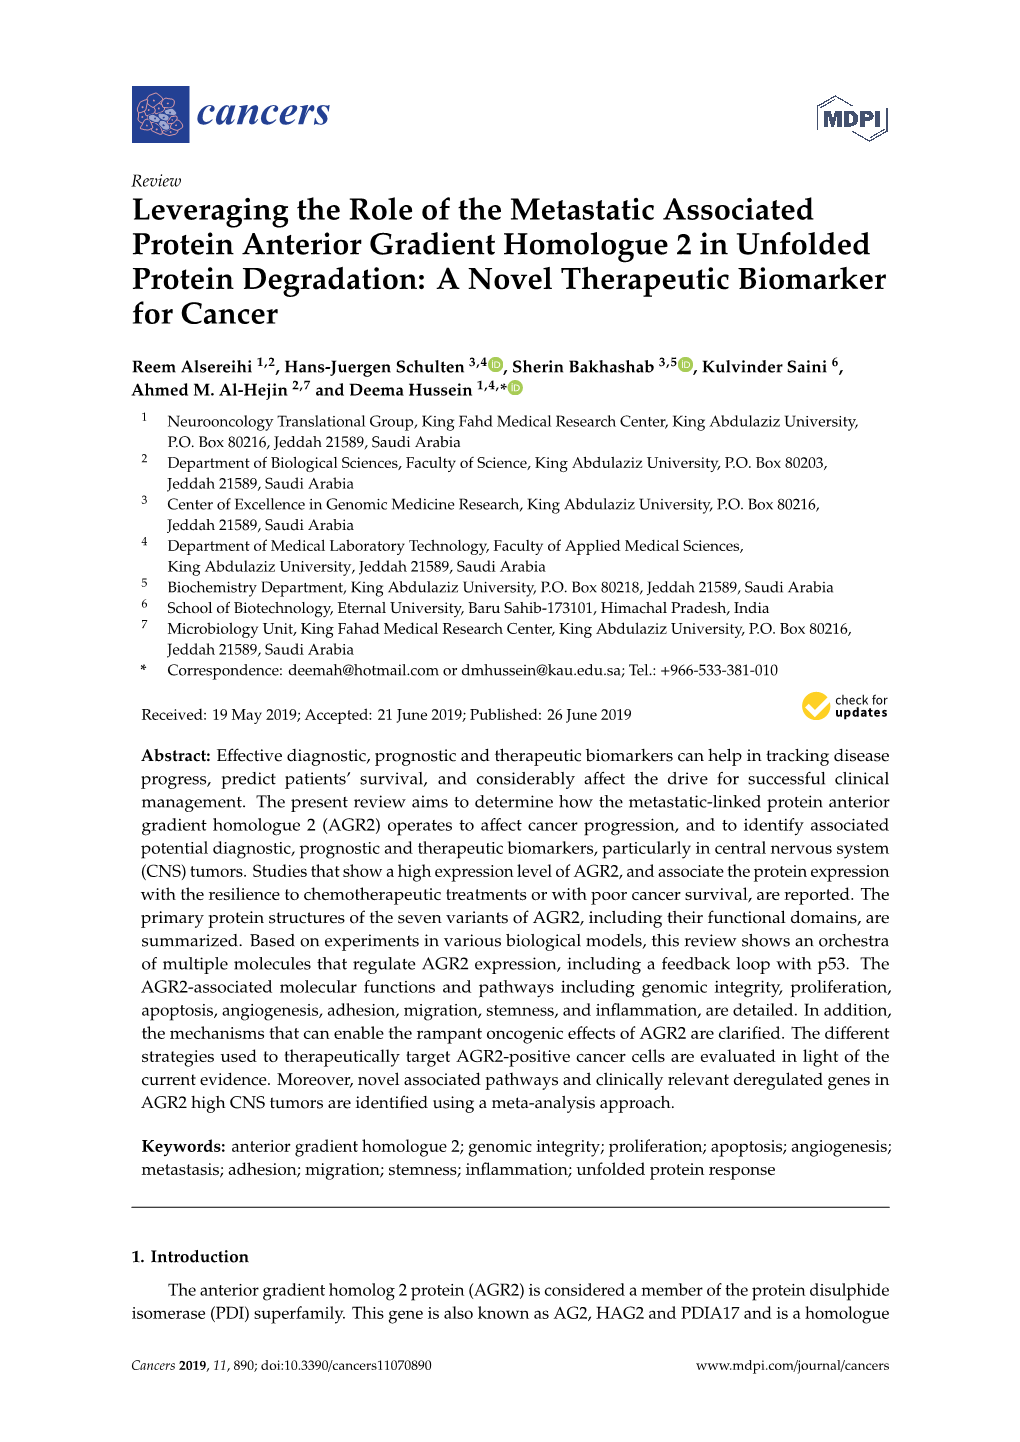 Leveraging the Role of the Metastatic Associated Protein Anterior Gradient Homologue 2 in Unfolded Protein Degradation: a Novel Therapeutic Biomarker for Cancer